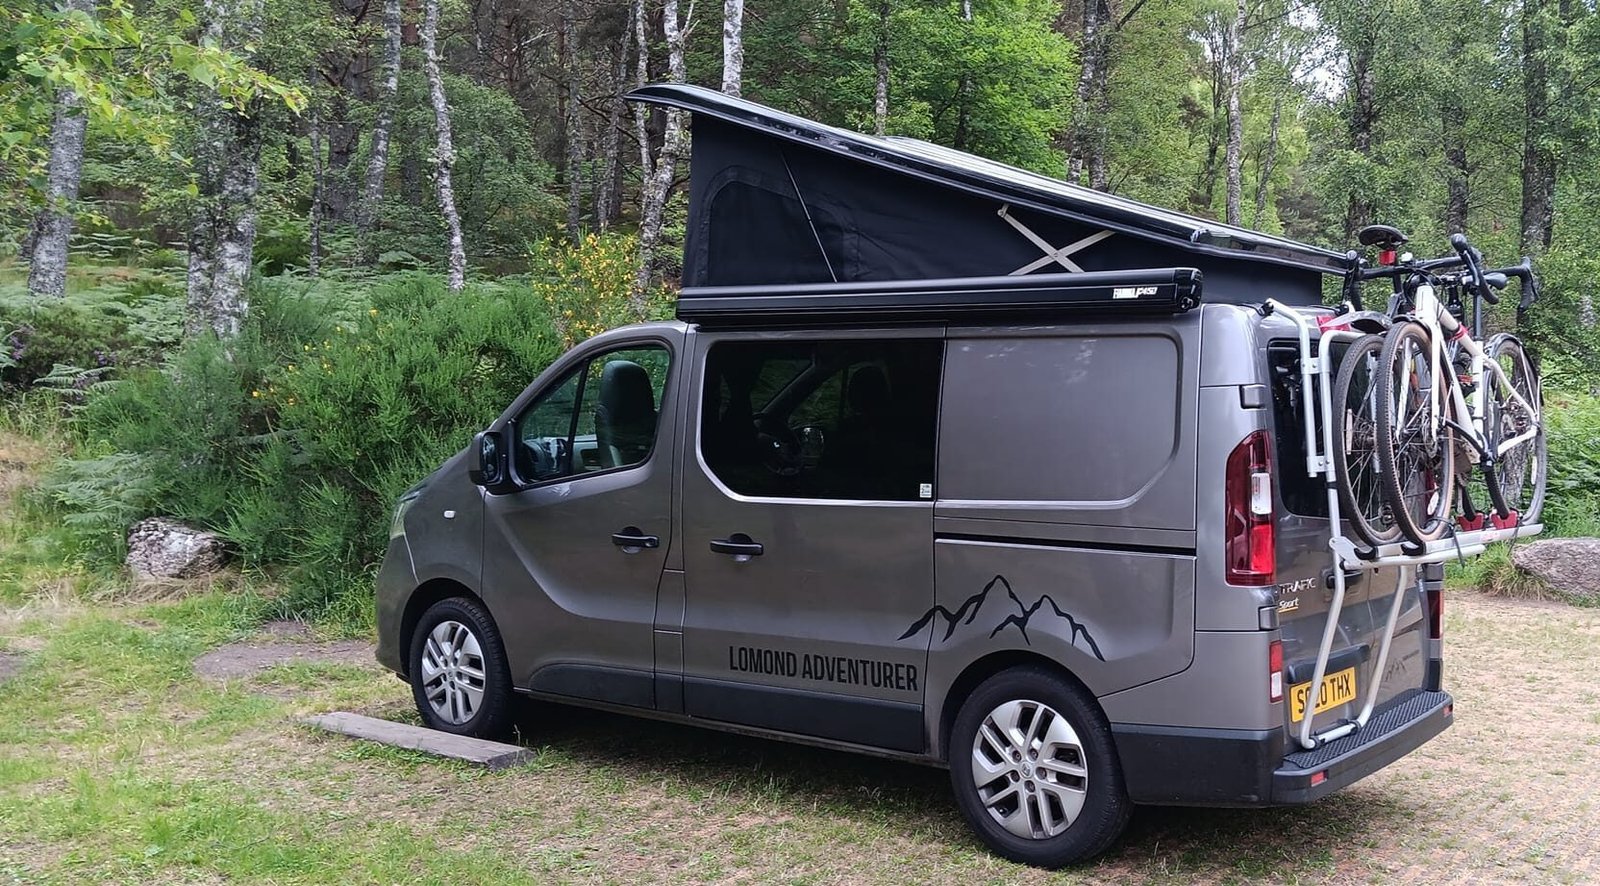 An example of a campervan conversion by Lomond Campers Extends a Helping Hand: Compensation for Caledonian Campers Customers